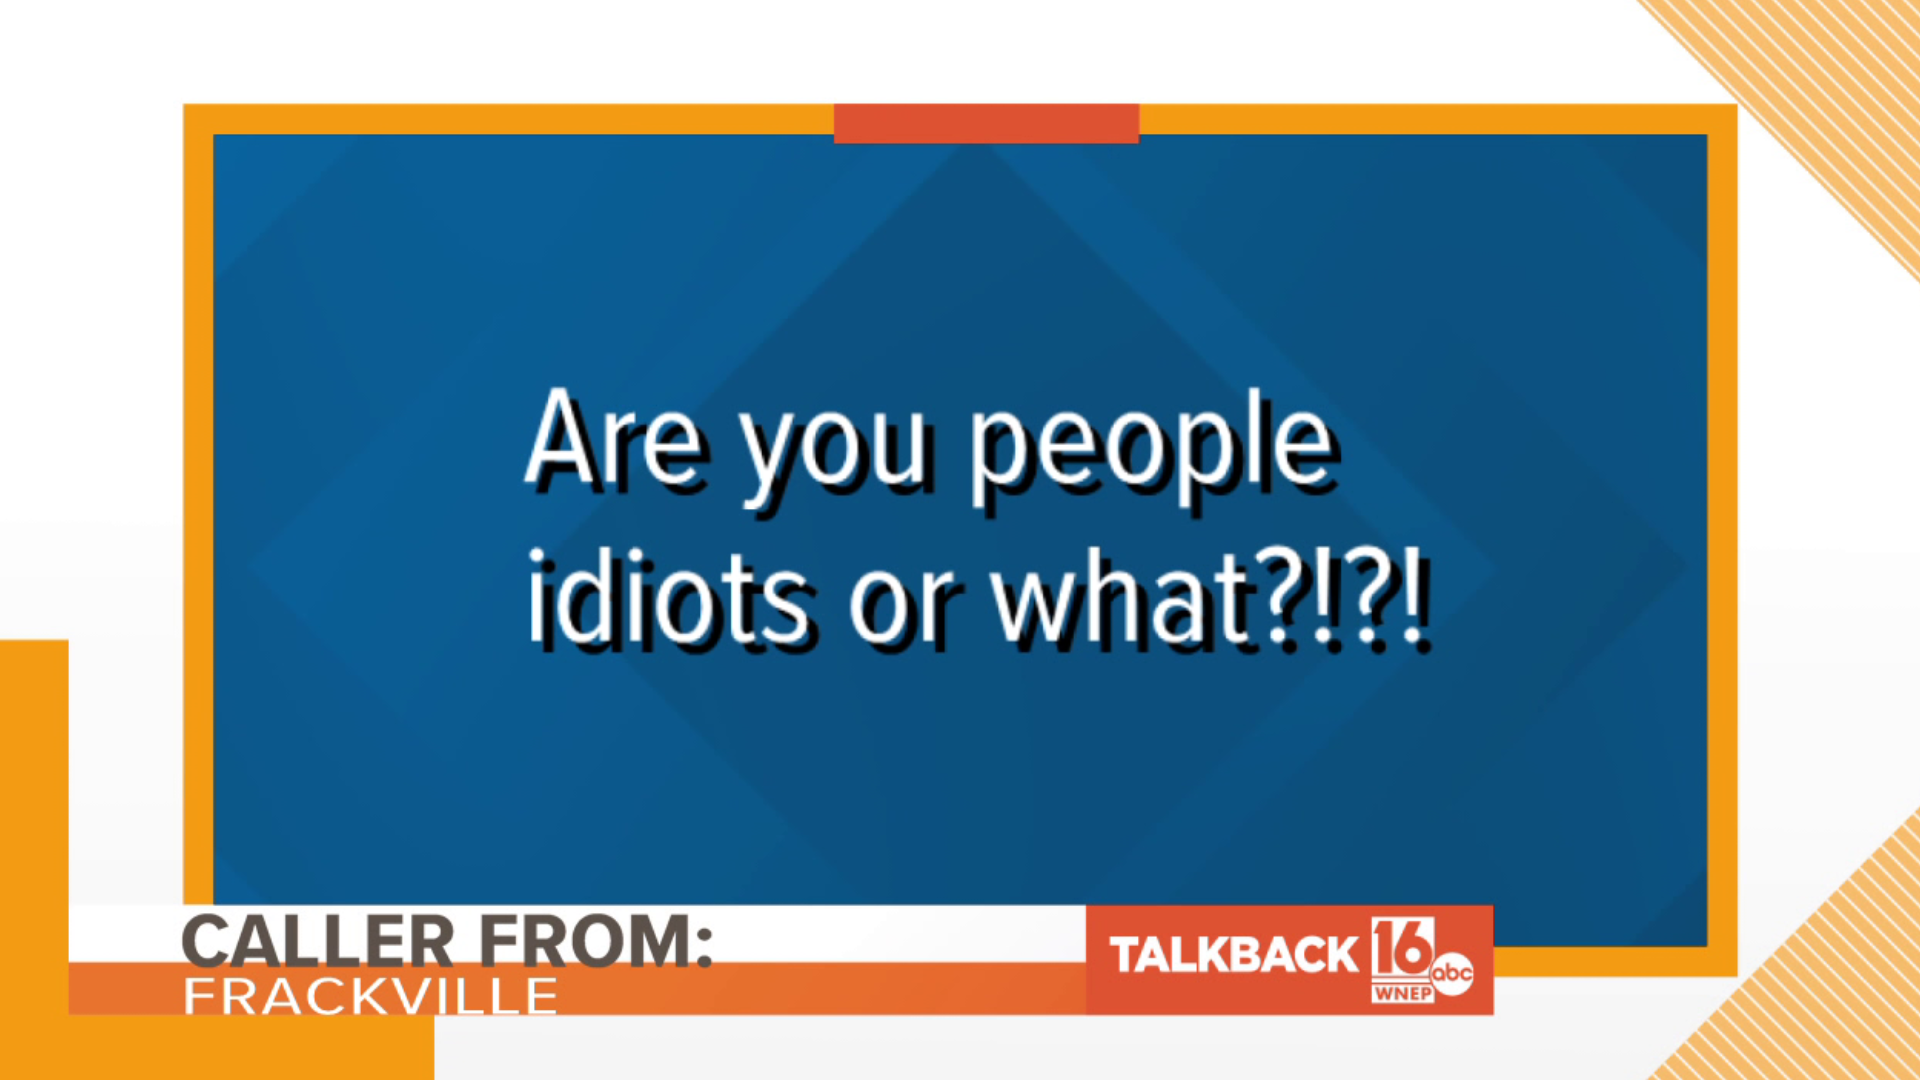 One caller from Frackville raised an important question: are you people idiots or what?